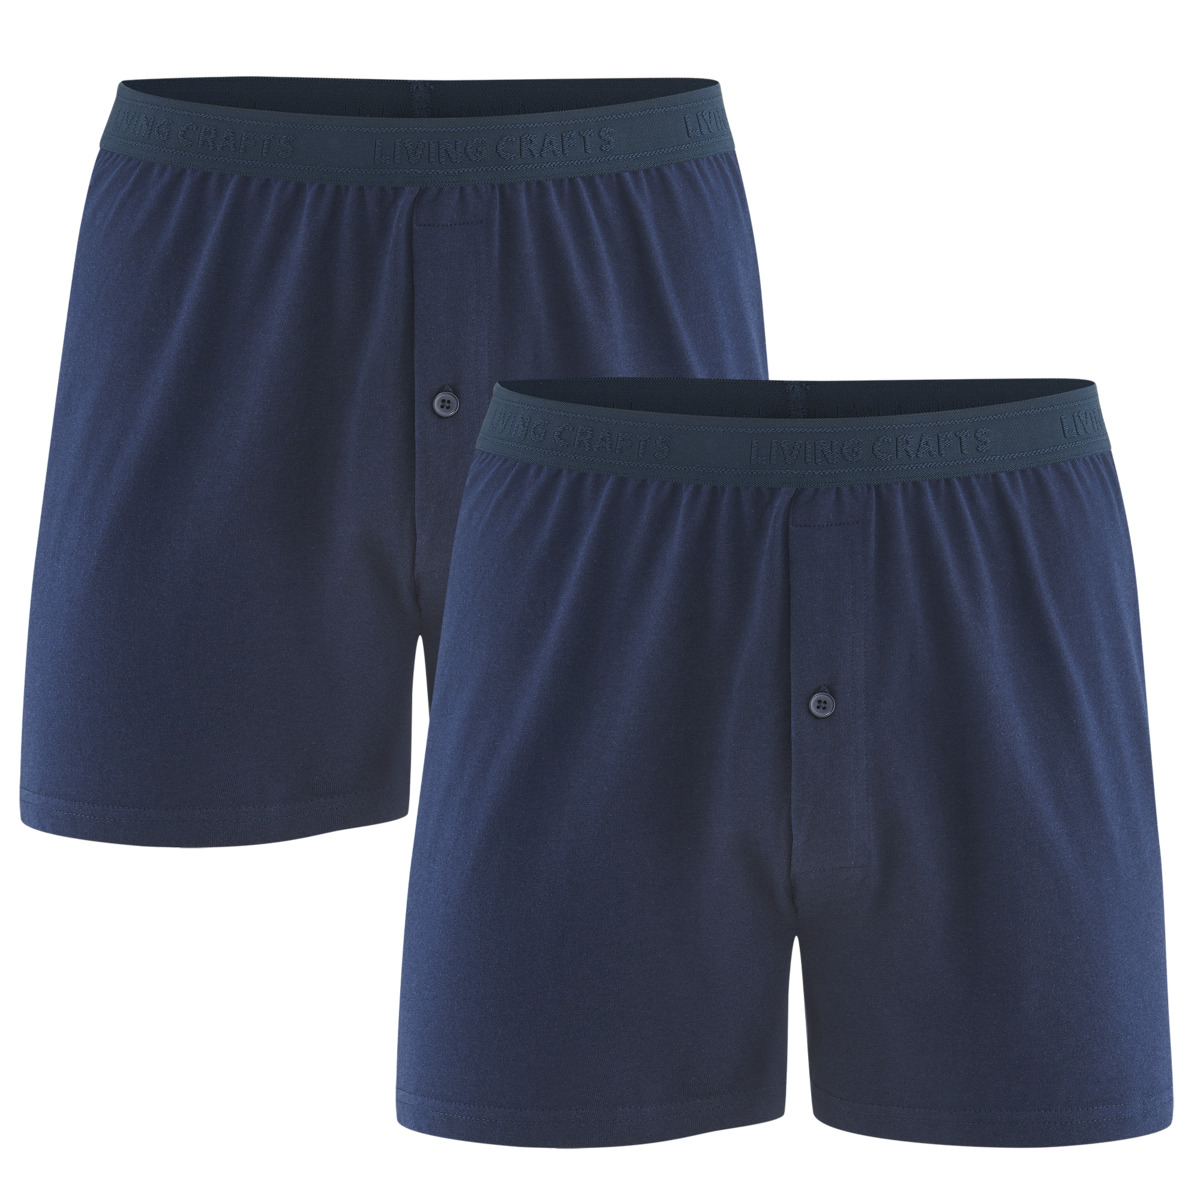 Blue Boxer shorts, pack of 2, ETHAN